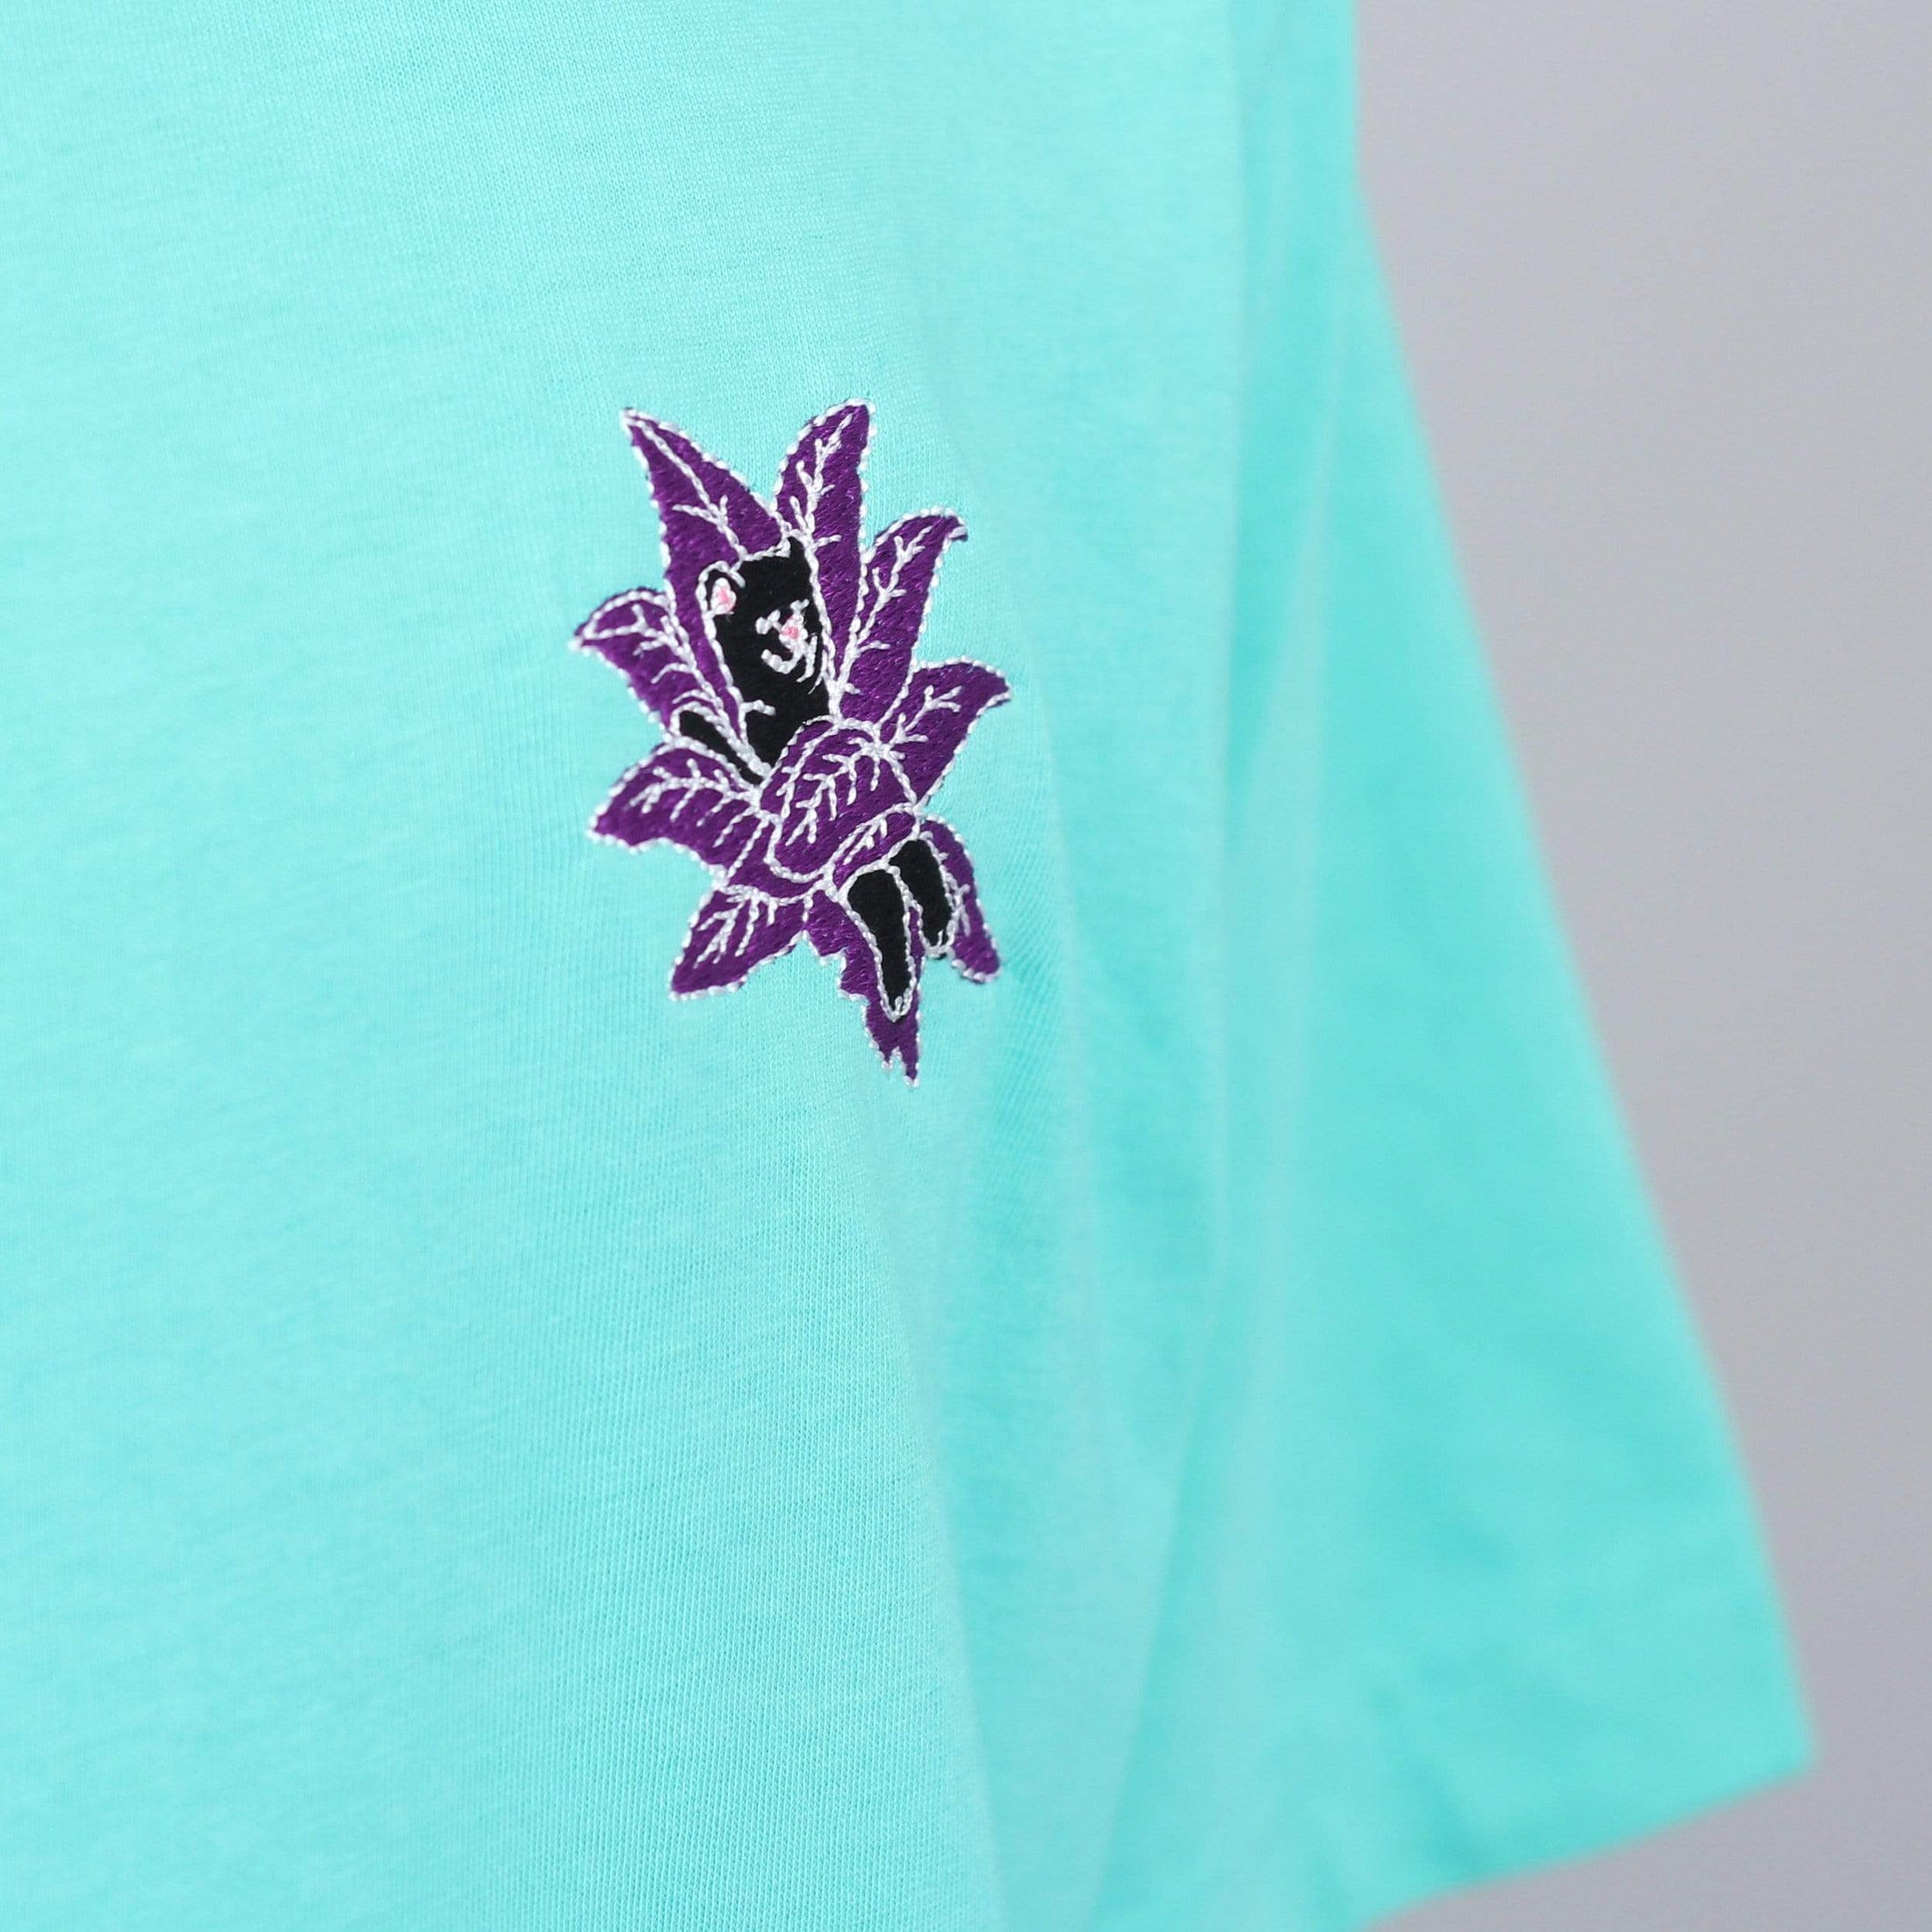 RIPNDIP Tucked In T-Shirt Teal